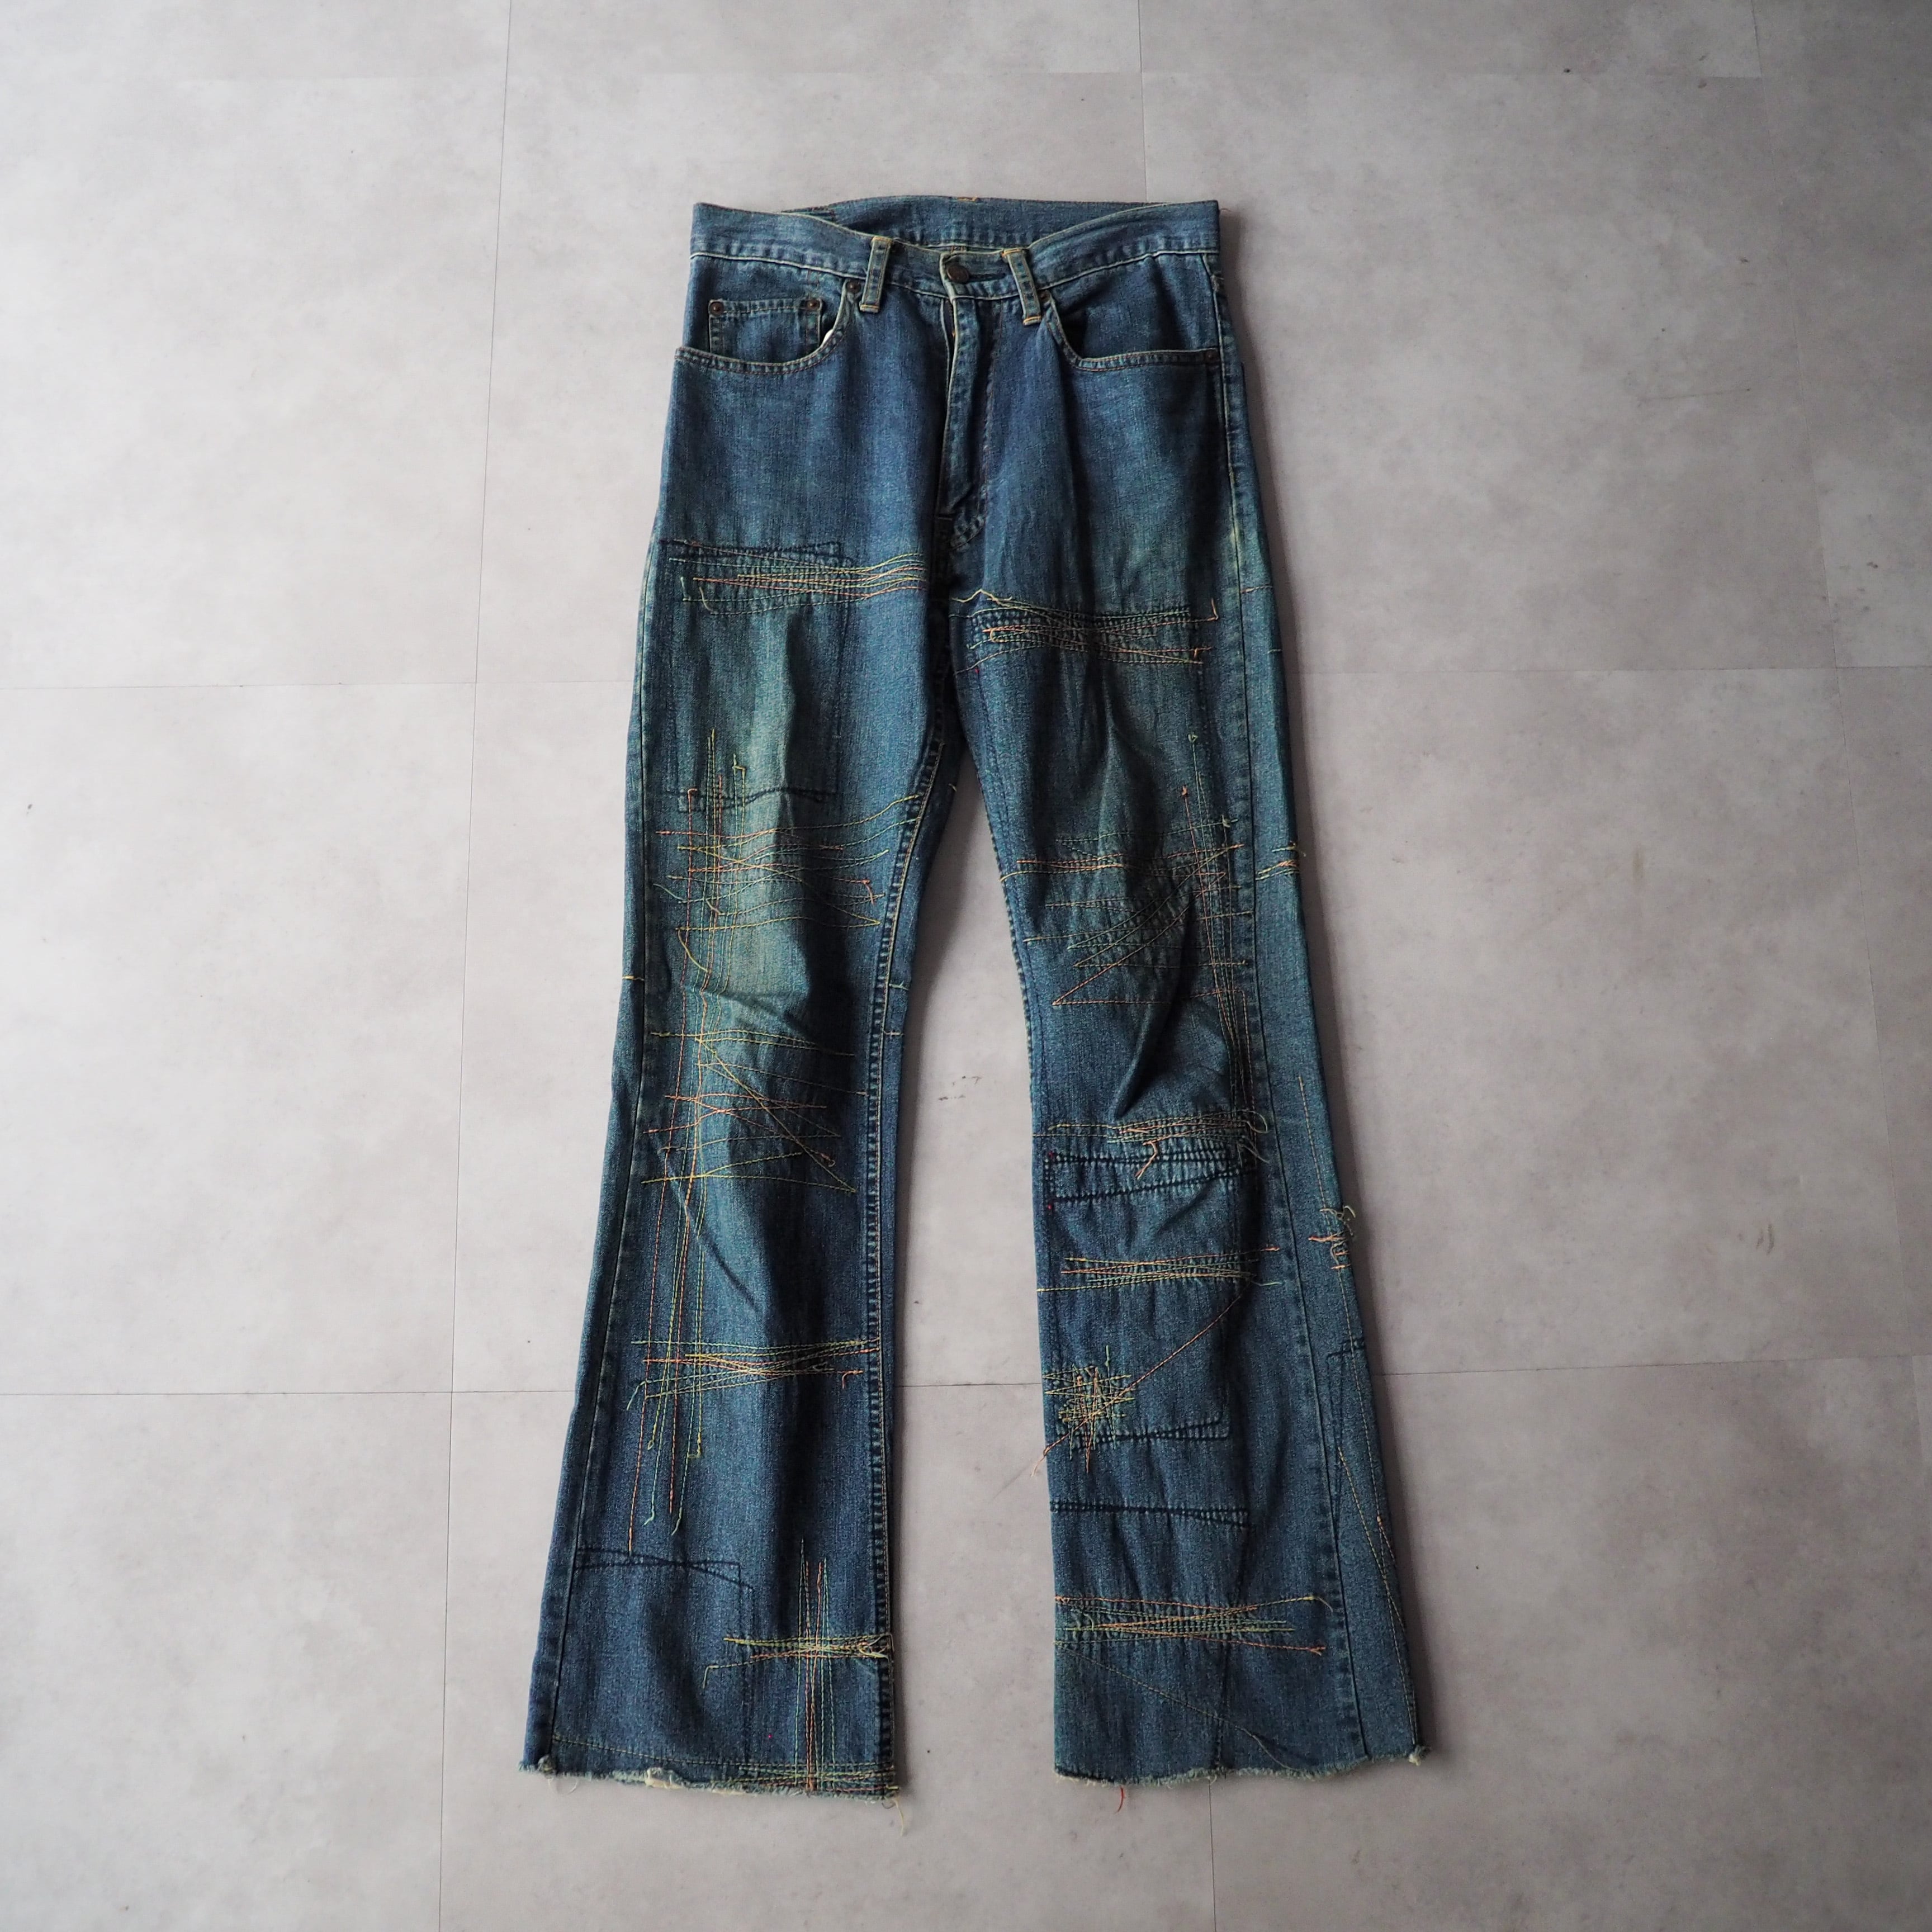 90s “hysteric glamour kinvy” embroideried boots cut denim pants